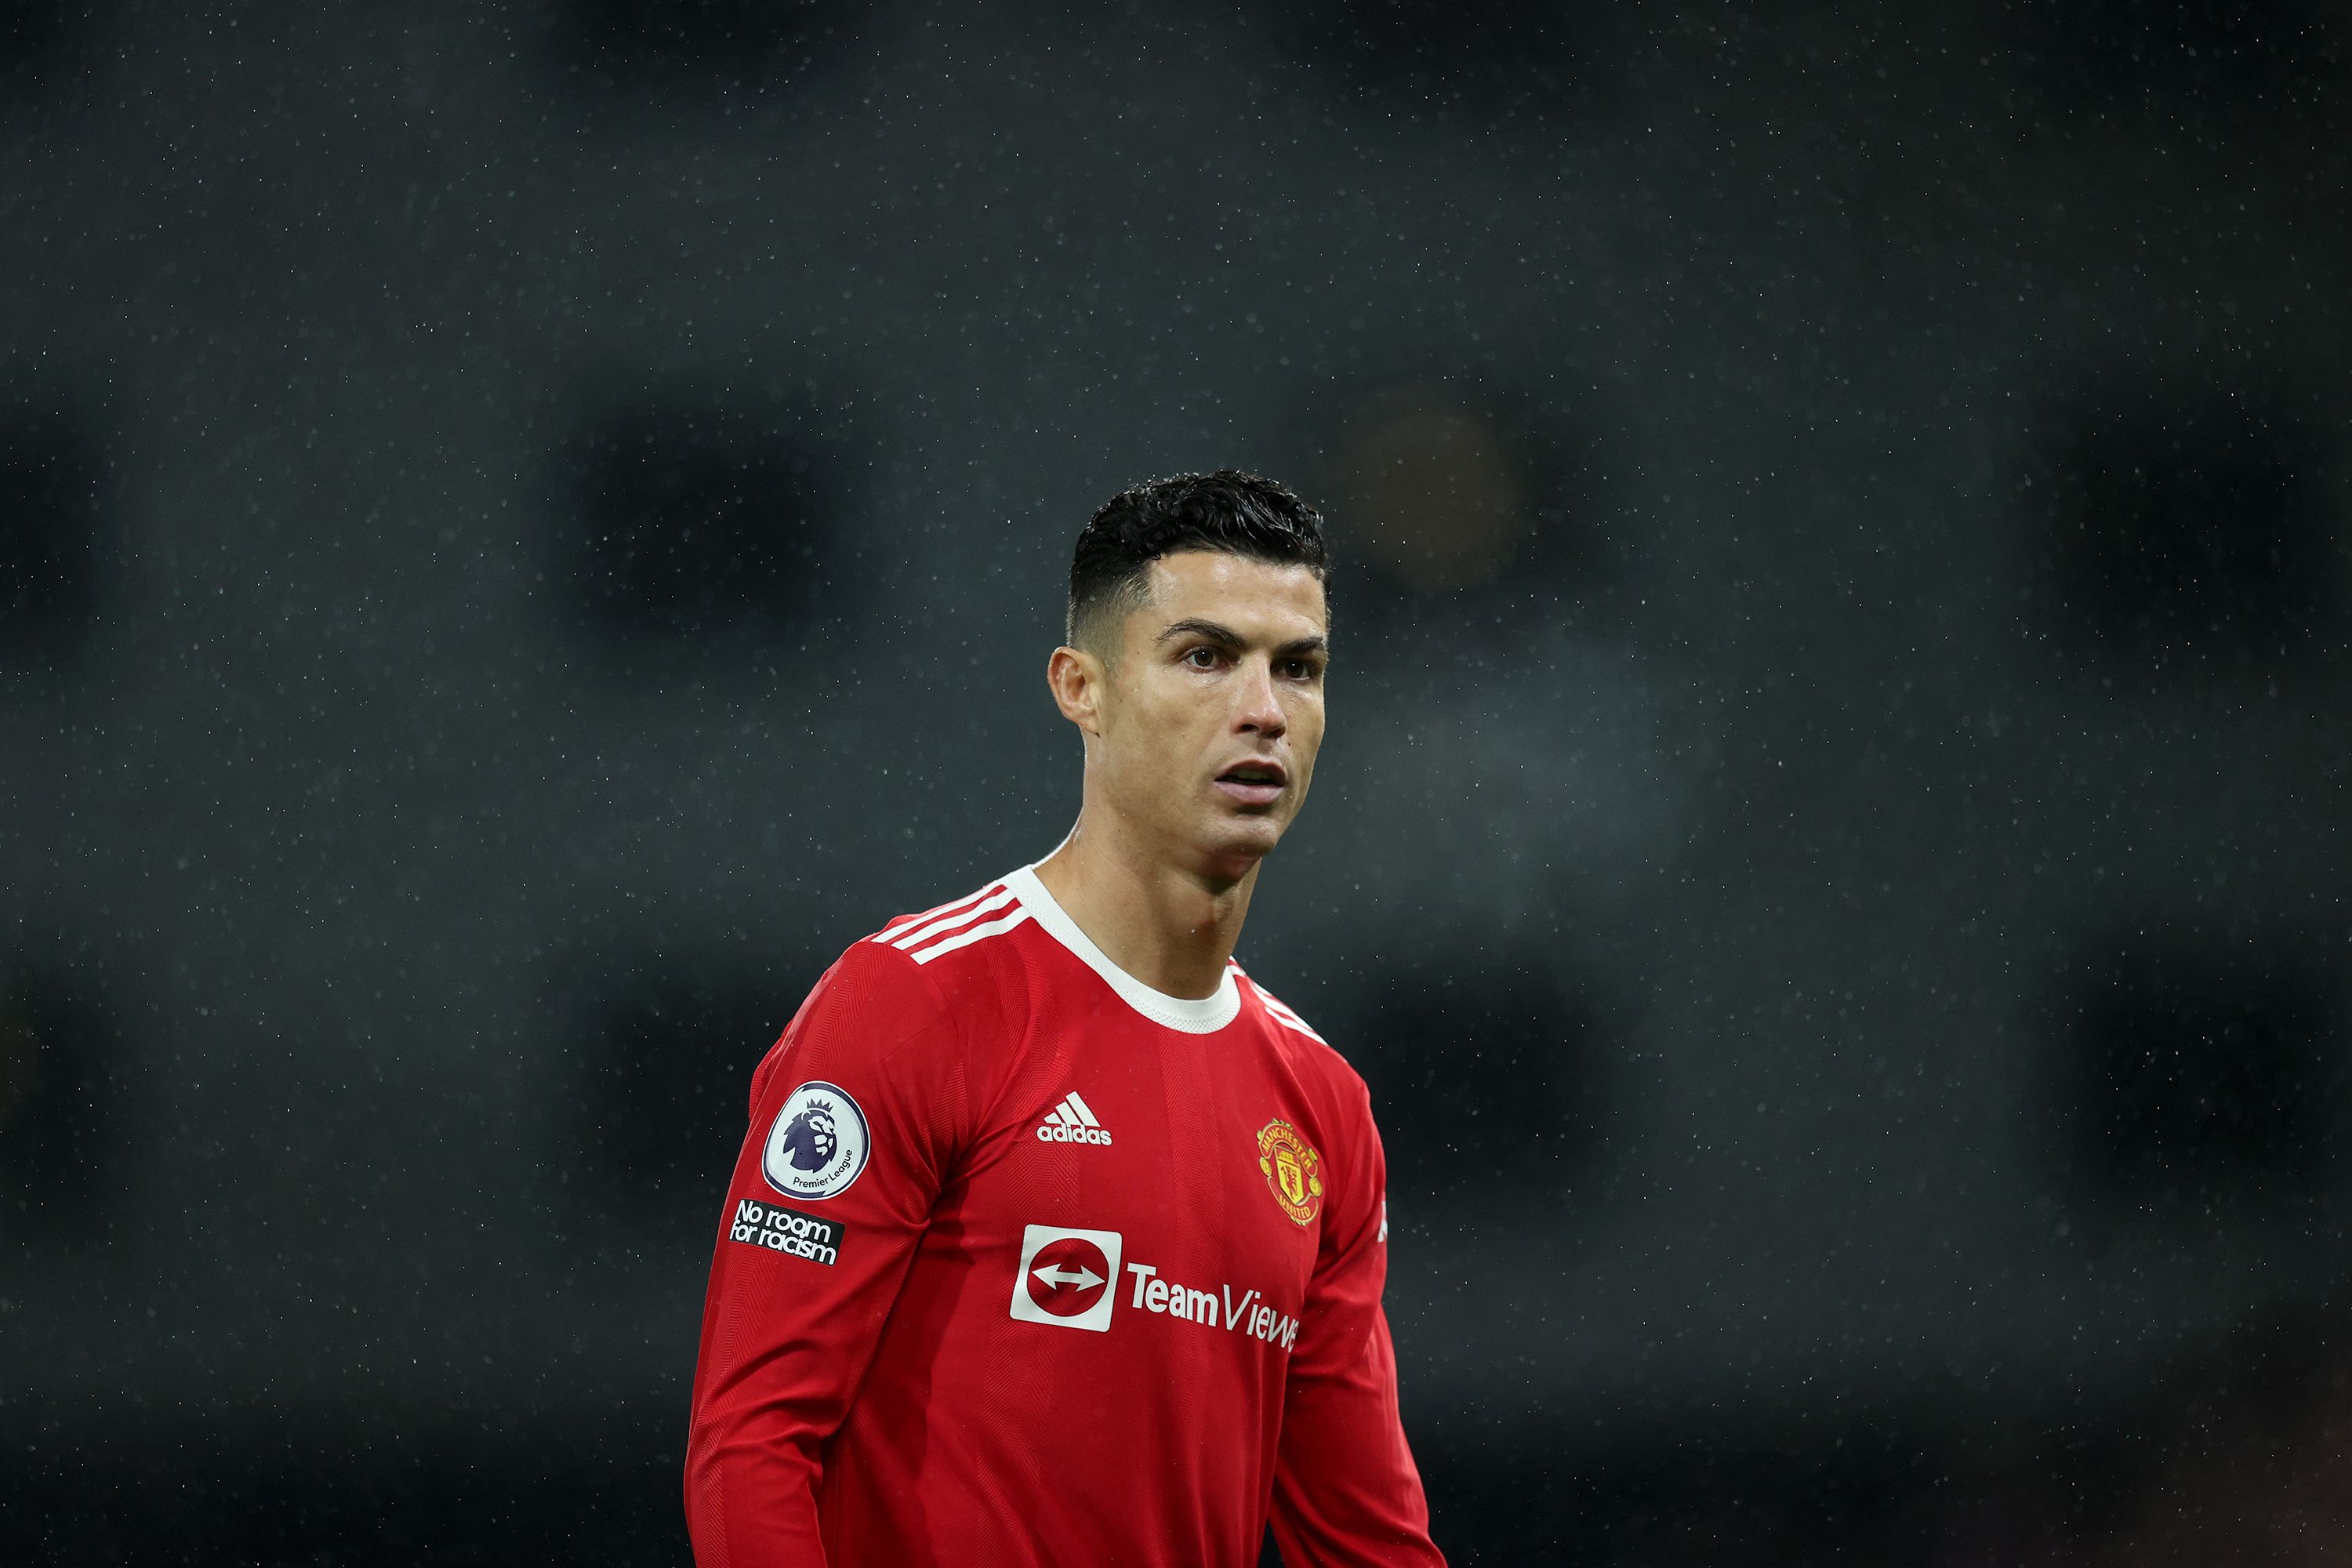 Telugu Real Raped Videos - Cristiano Ronaldo: Rape case against soccer star dismissed due to  'misconduct' by plaintiff's attorney | CNN